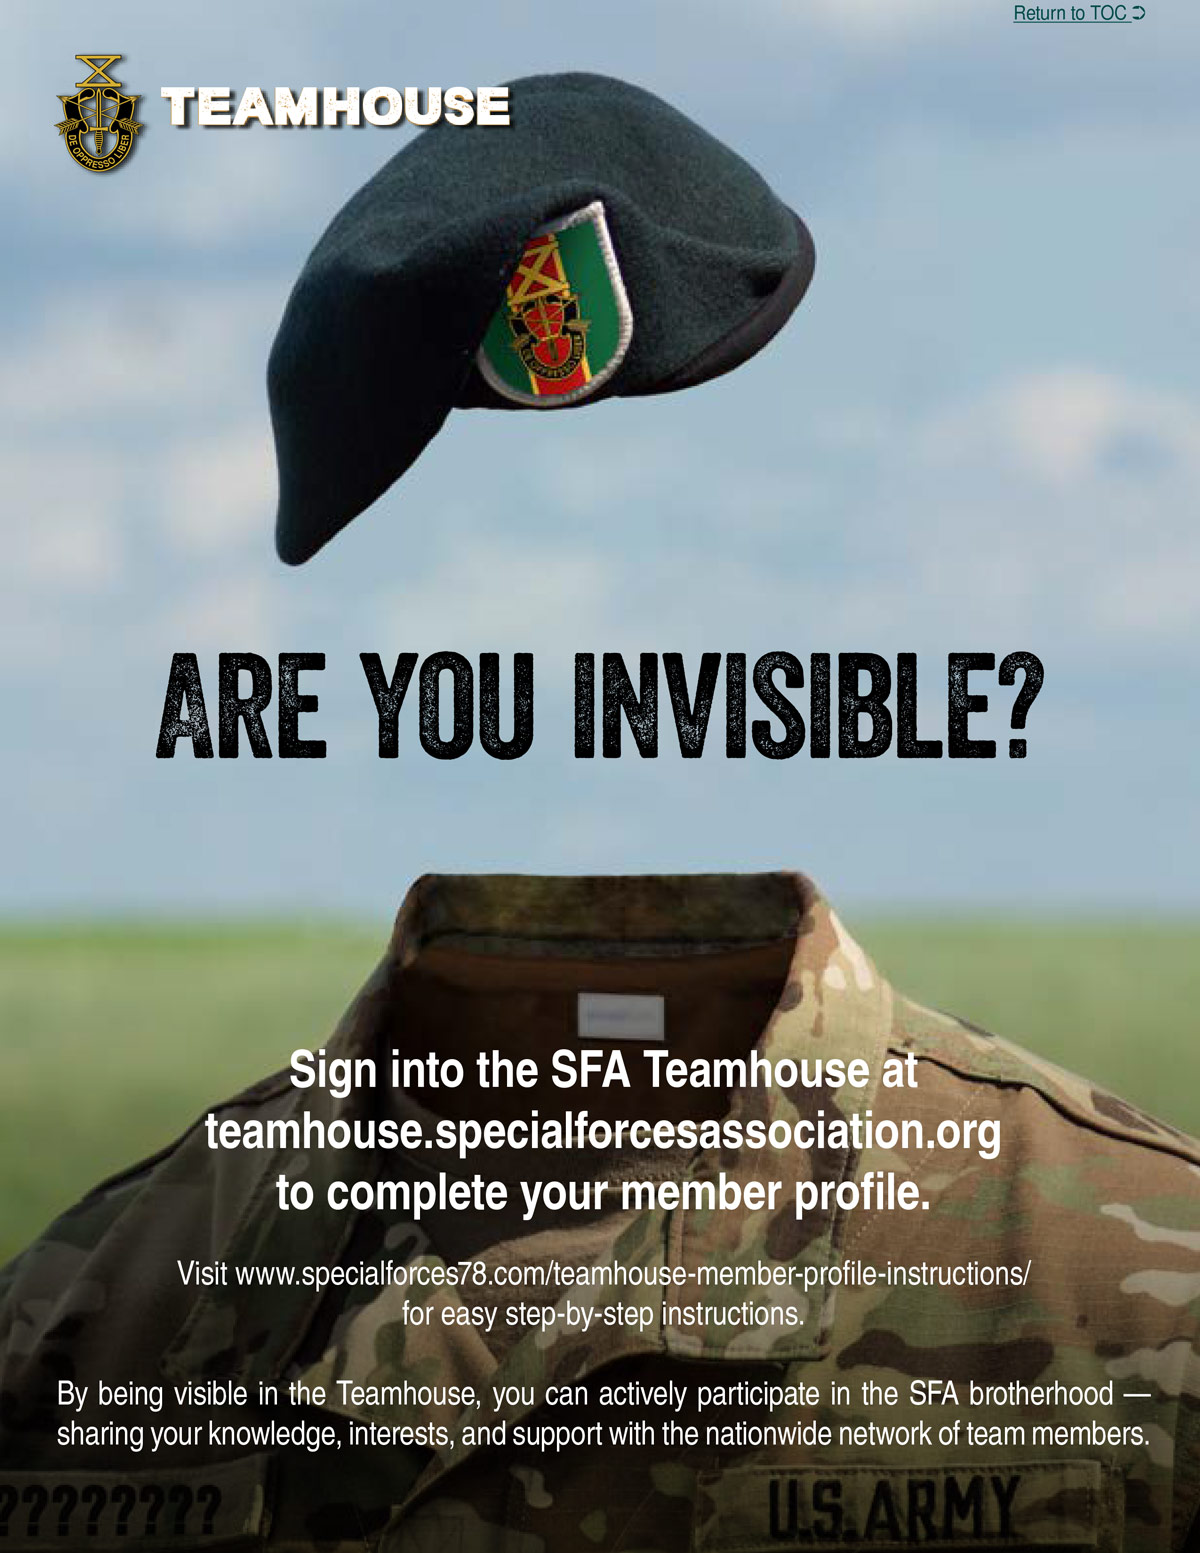 Are You Invisible. You may be if you haven't updated your member profile at teamhouse.specialforcesassociation.org